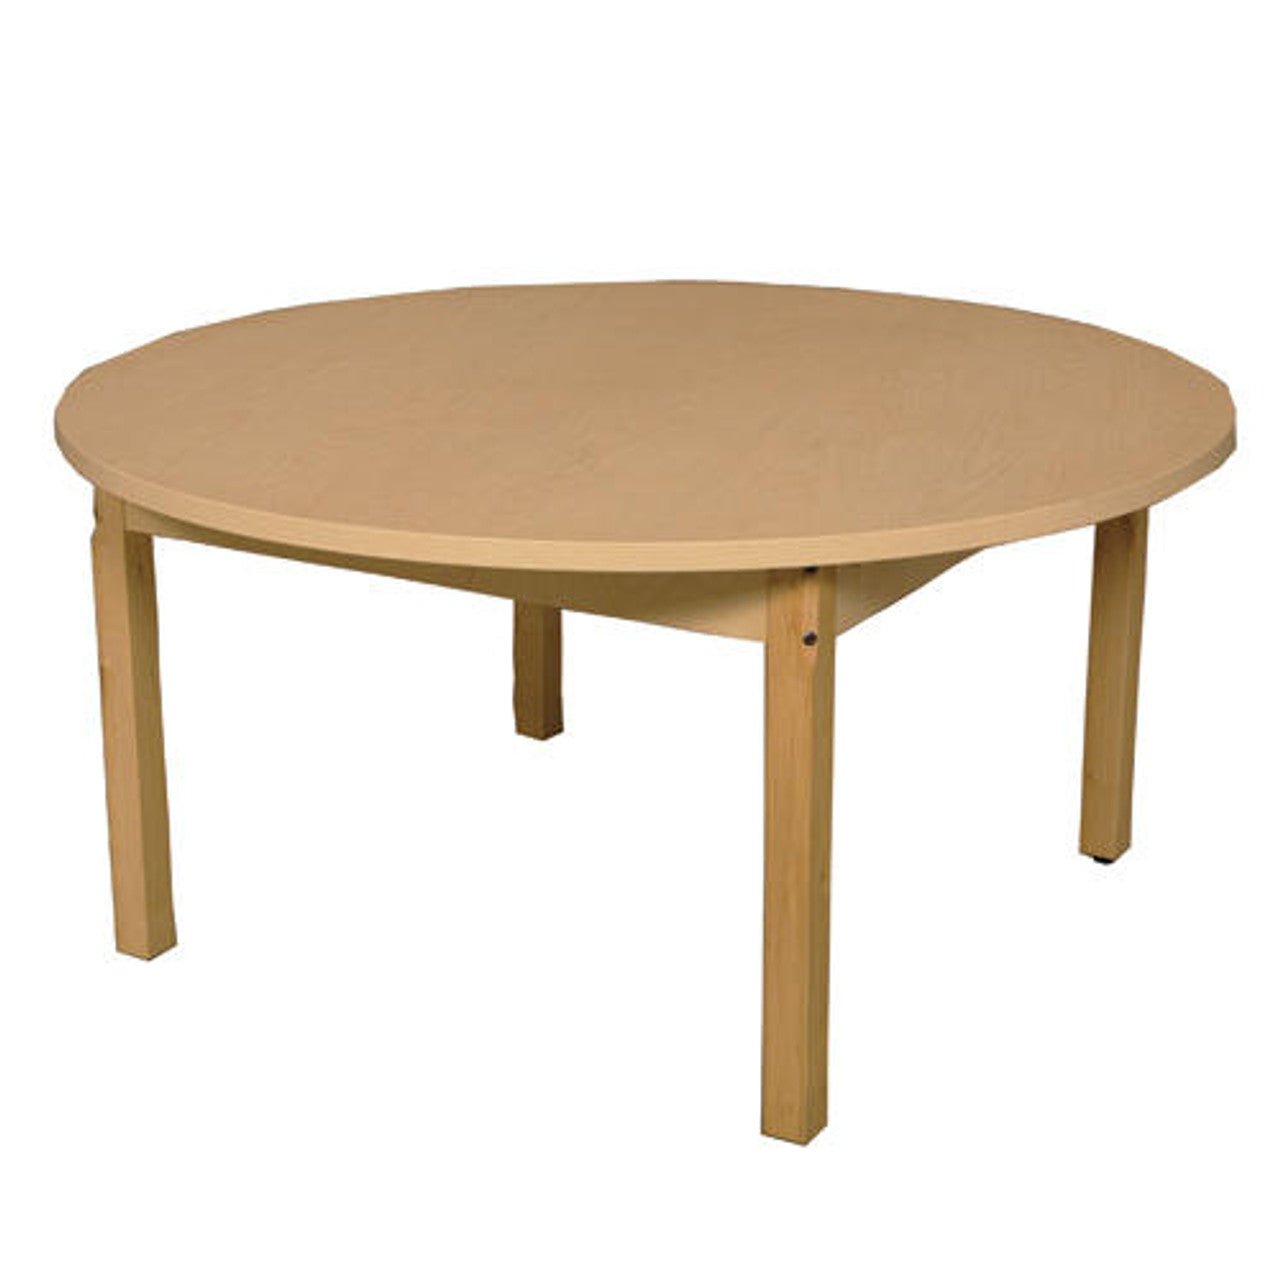 Round High Pressure Laminate Table with Hardwood Legs- 18"